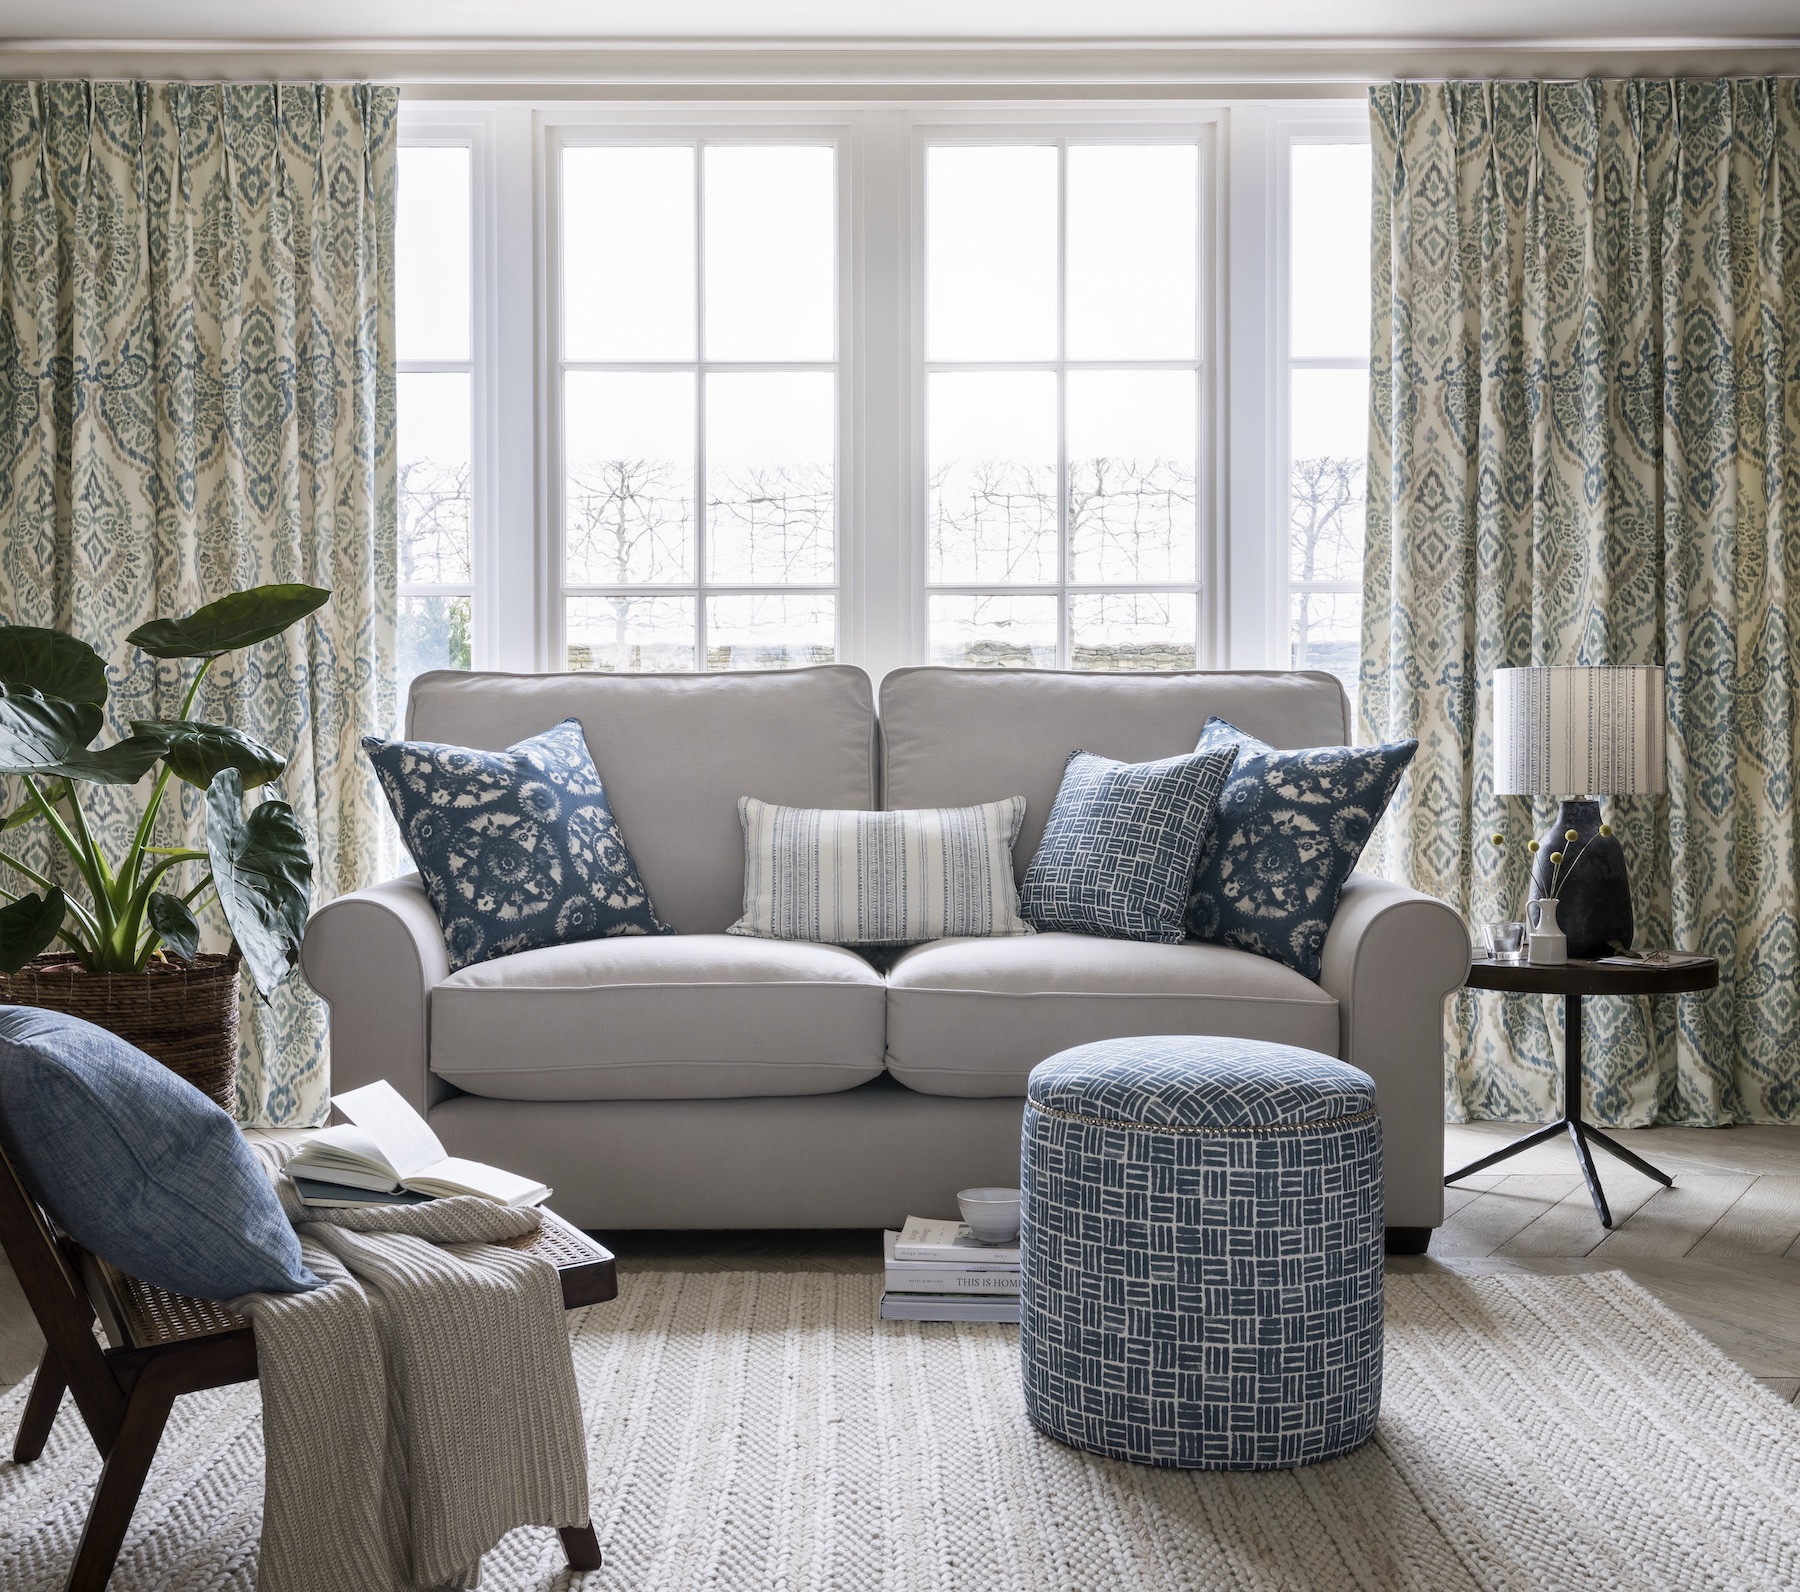 Blue decorating ideas: style rooms with this all-time classic colourway